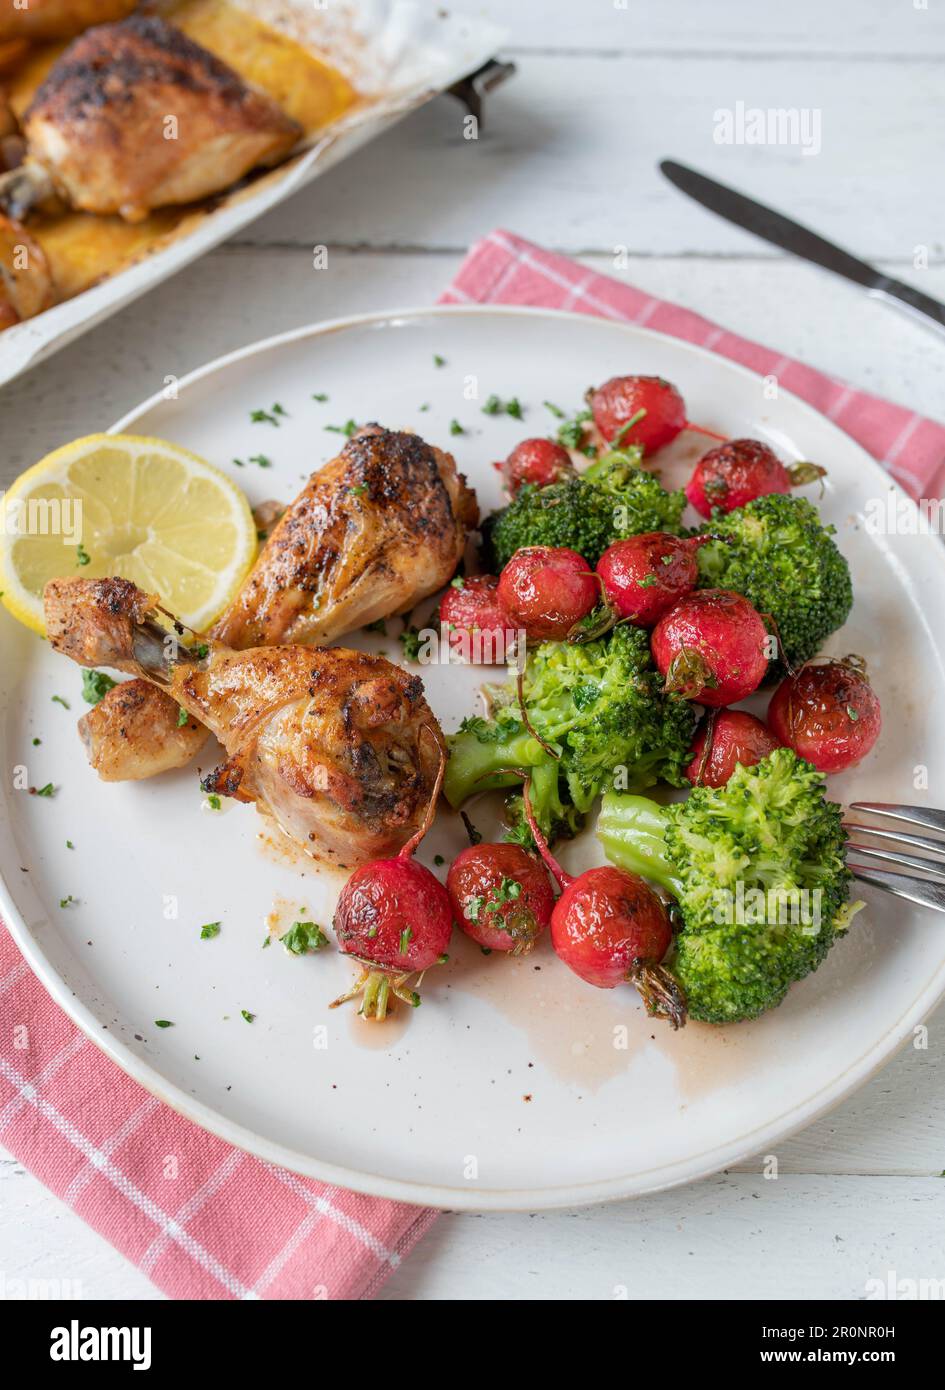 Warm salad with red radish and broccoli. Served with baked chicken on a plate Stock Photo